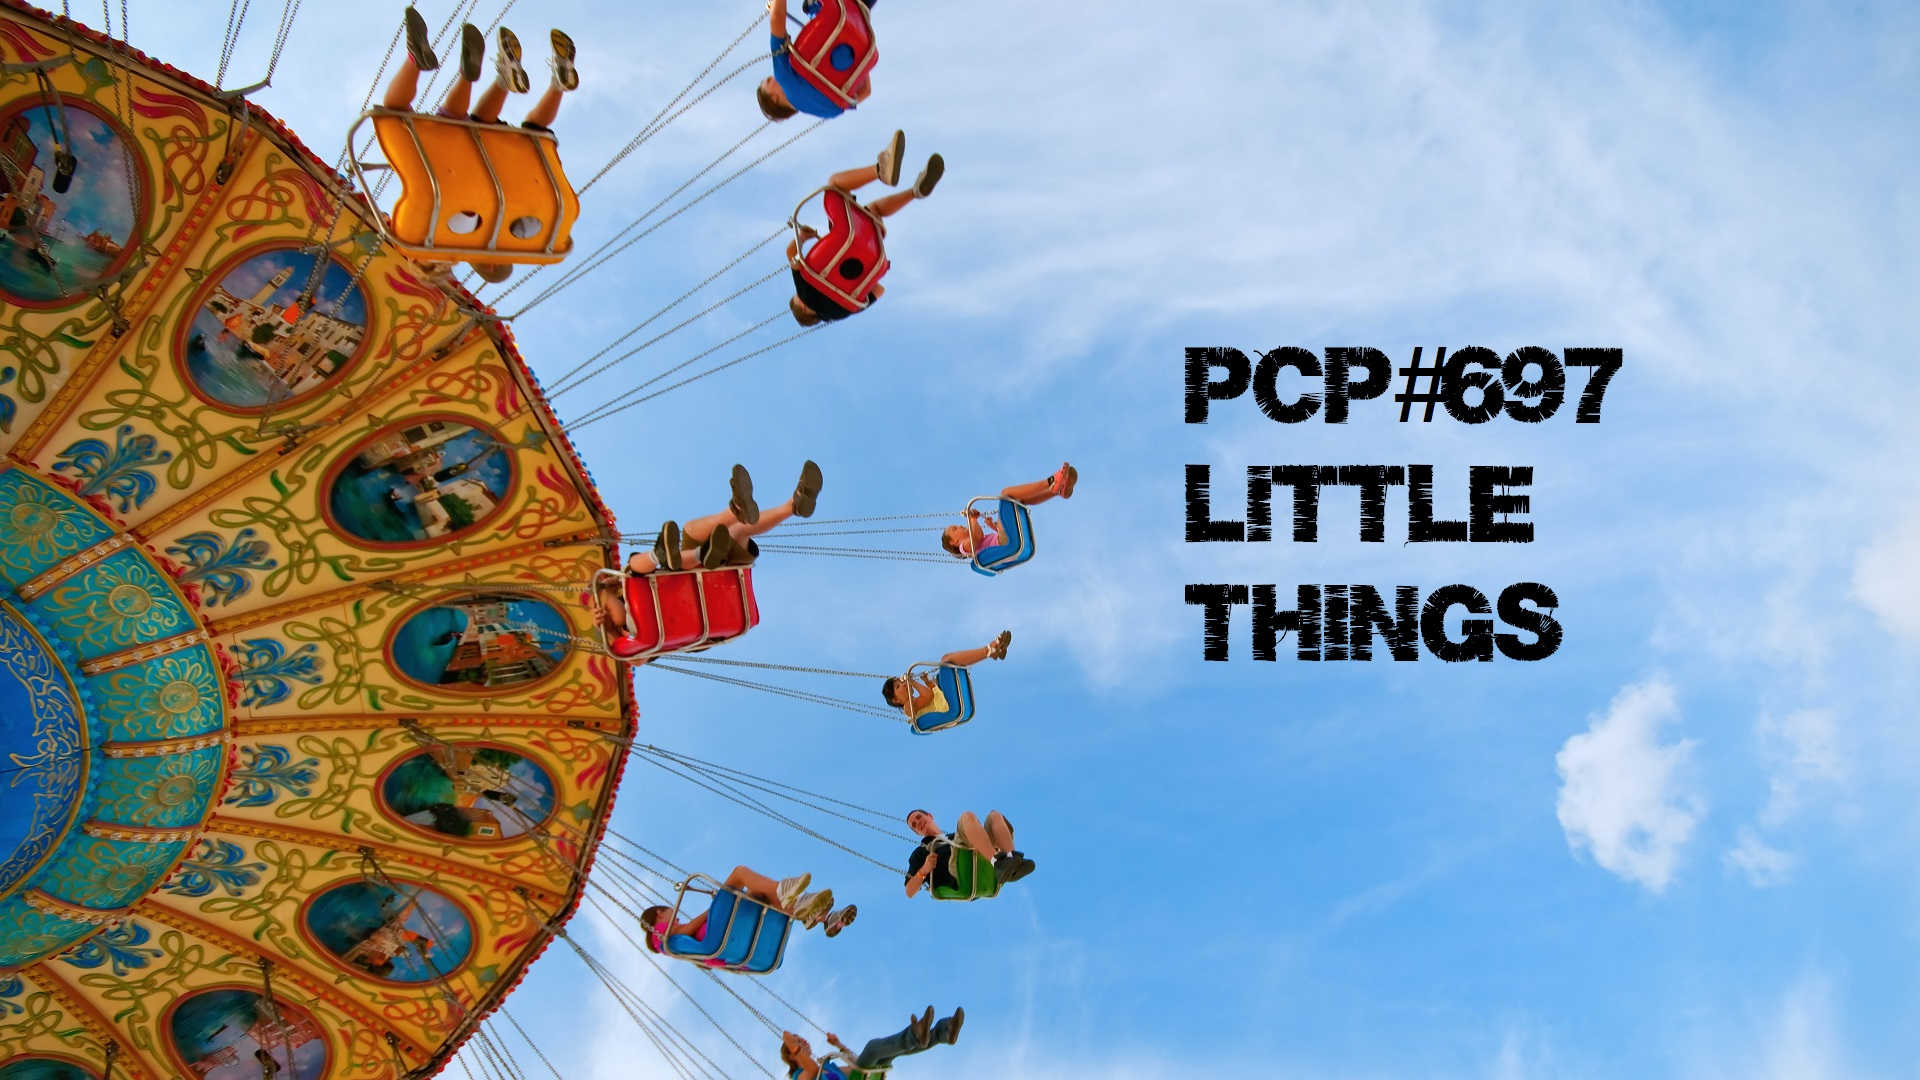 PCP#697... Little Things.....